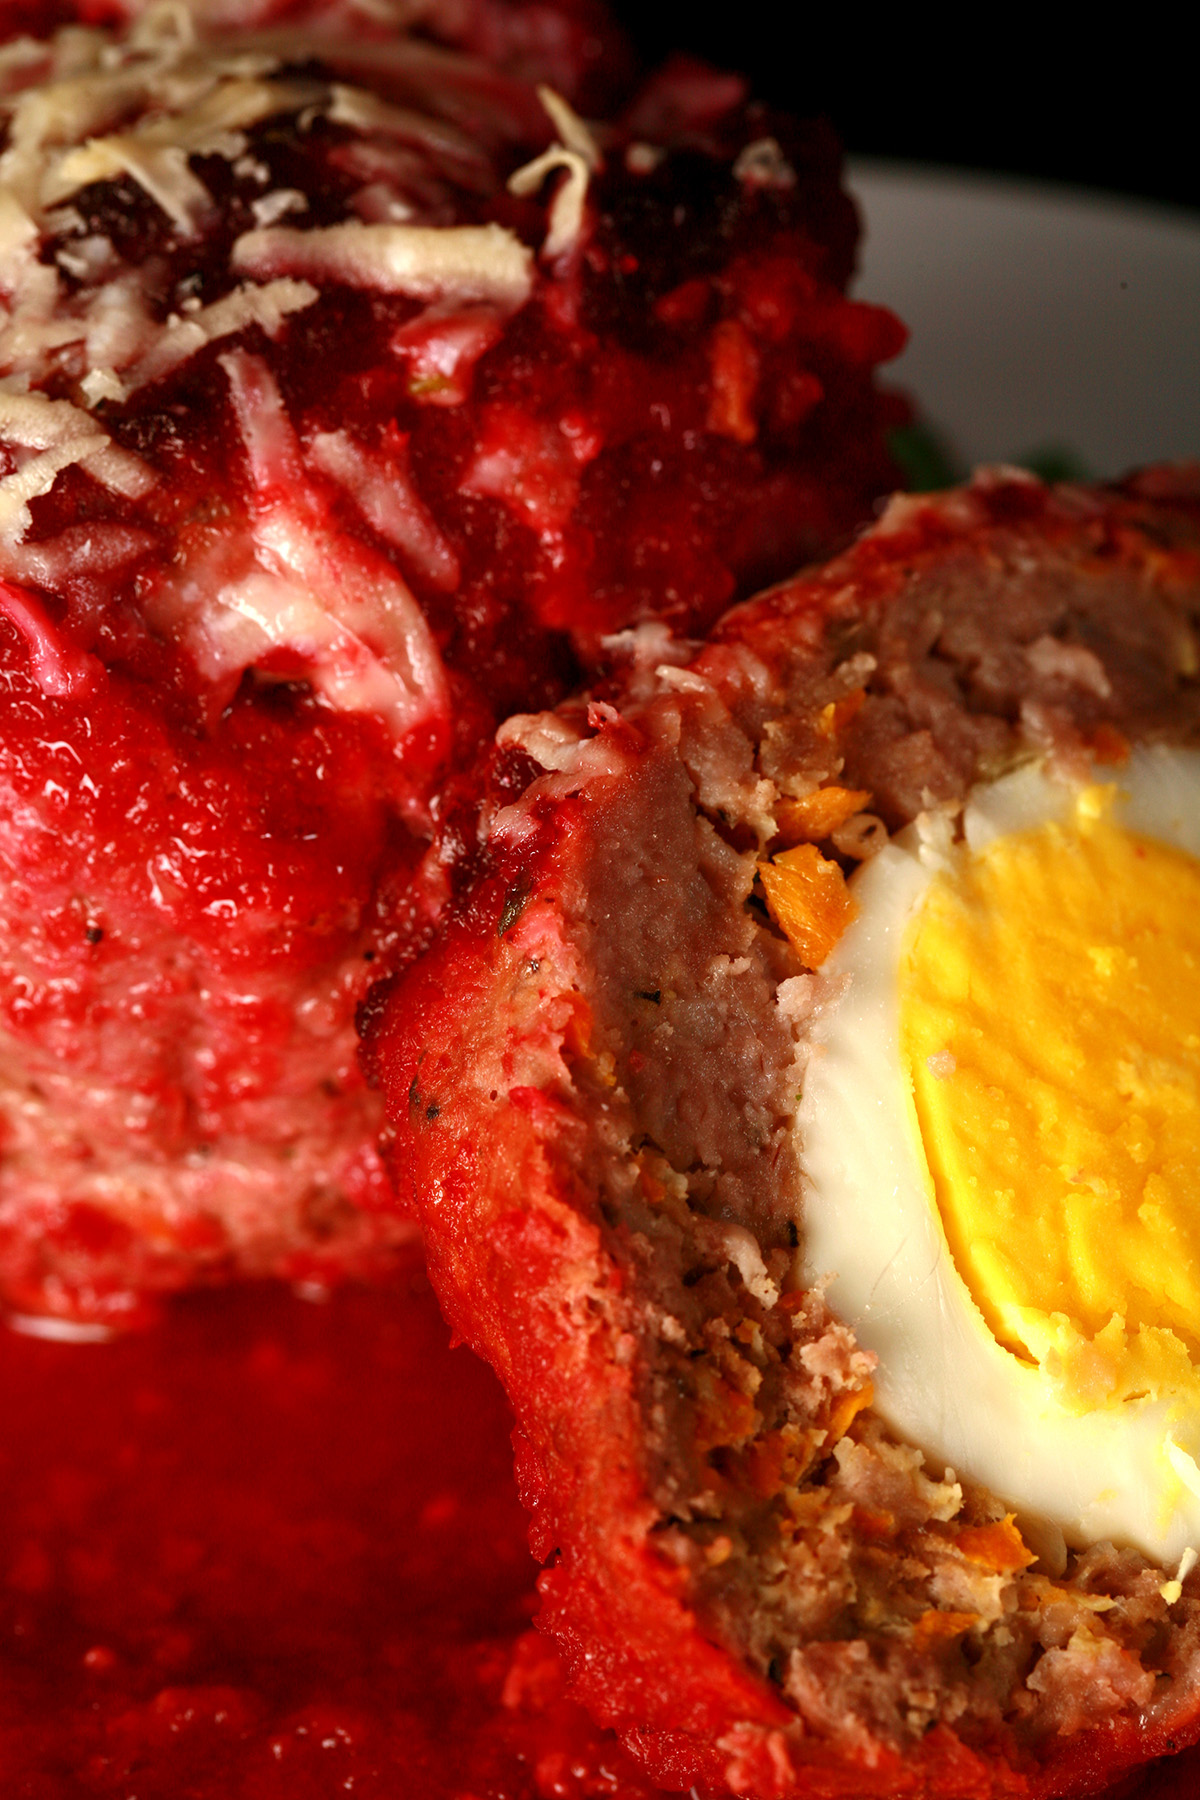 An individual scotch egg meatloaf on a white plate, with a half meatloaf next to it. The half serving shows the hard boiled egg surrounded by meatloaf.